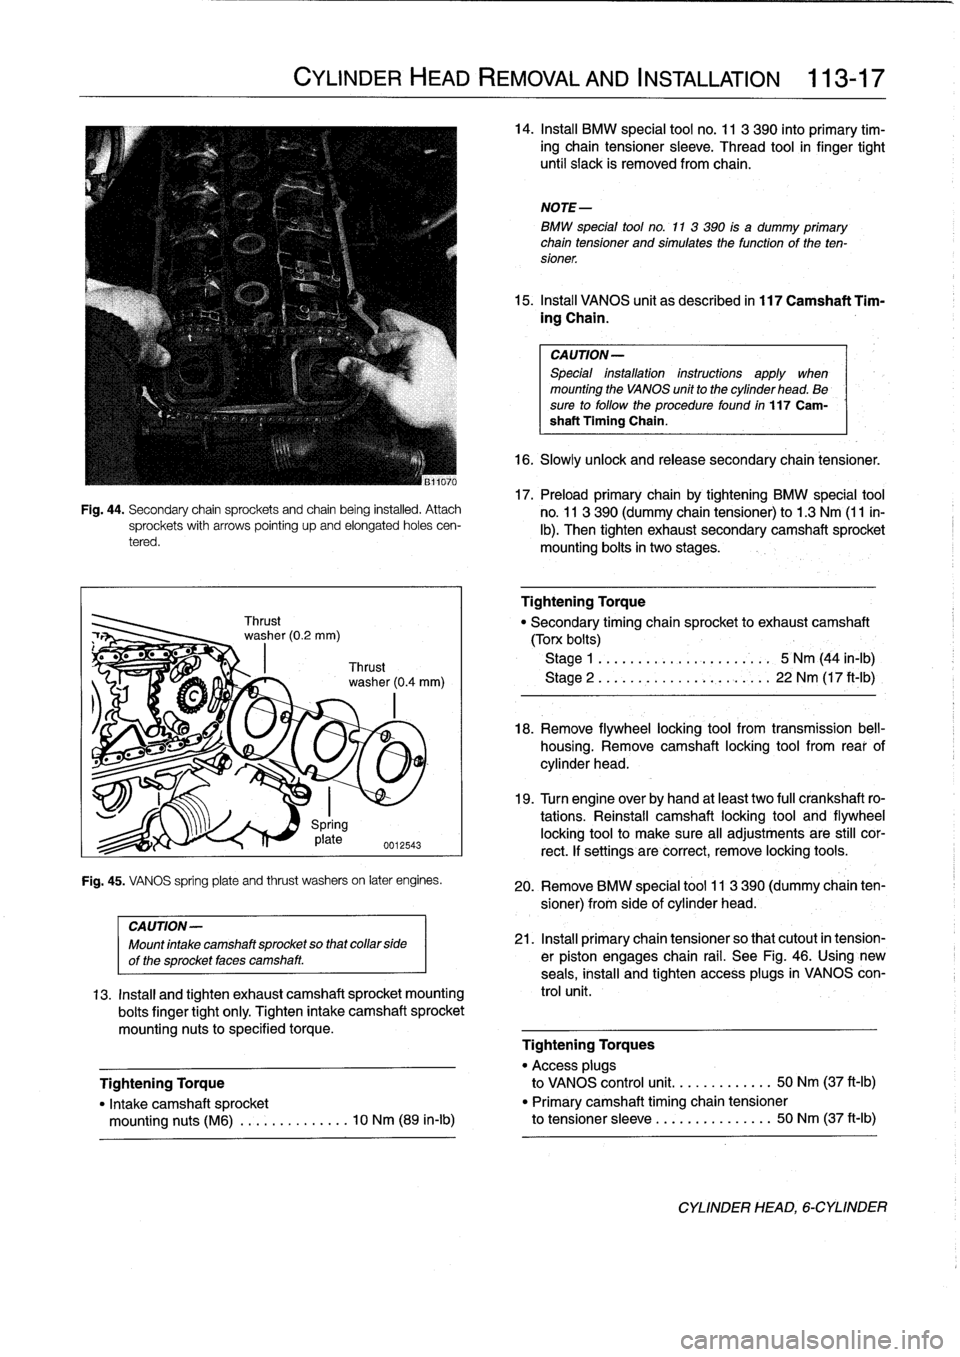 BMW 323i 1993 E36 Workshop Manual 
Fig
.
44
.
Secondary
chain
sprockets
and
chain
being
installed
.
Attachsprockets
with
arrows
pointing
upand
elongated
holes
cen-
tered
.

CYLINDER
HEAD
REMOVAL
AND
INSTALLATION

	

113-17

Spring
17
